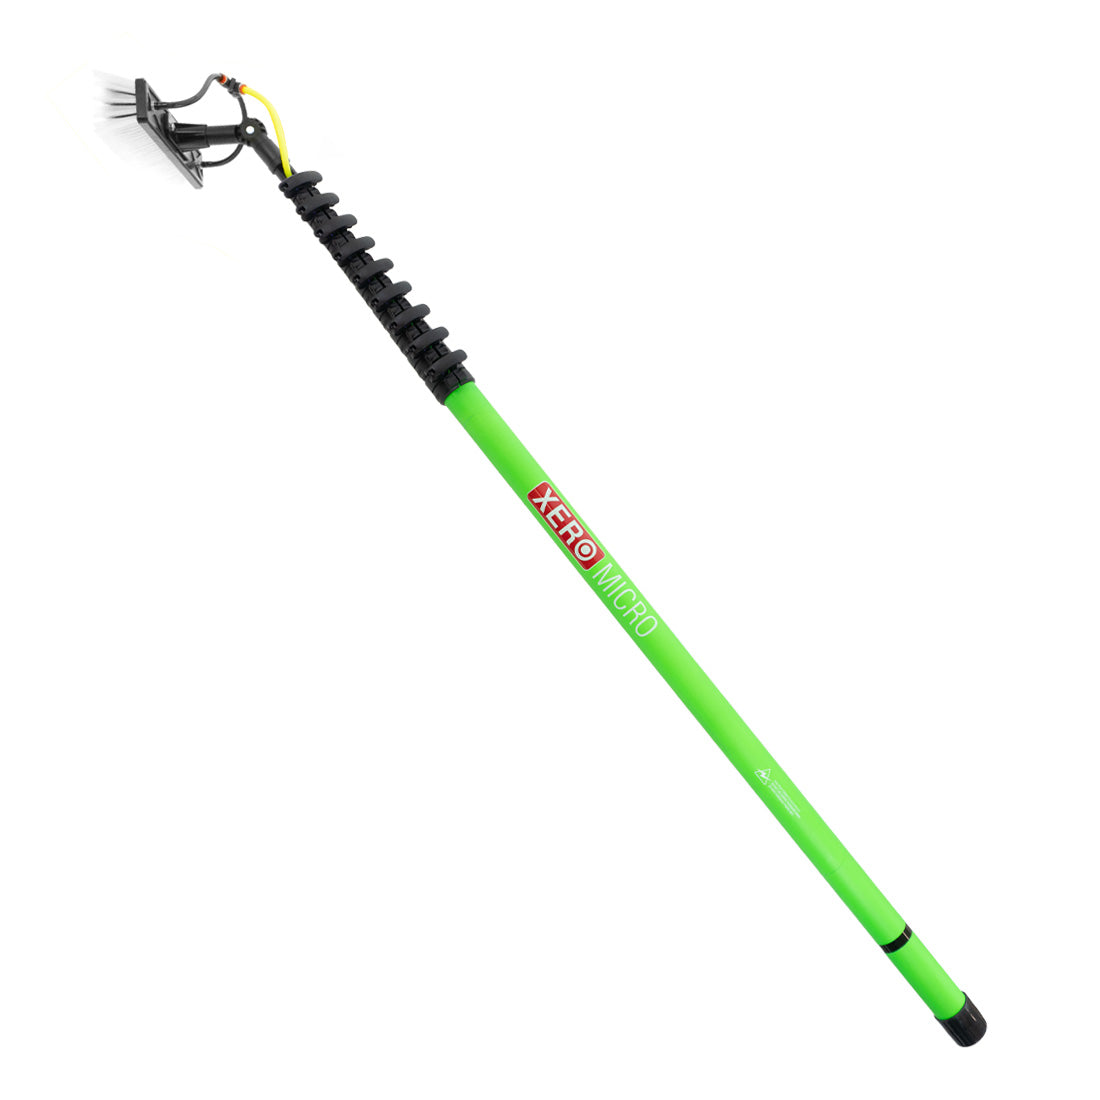 XERO Micro Basic Carbon Fiber Water Fed Pole - Neon Green Front View with Brush